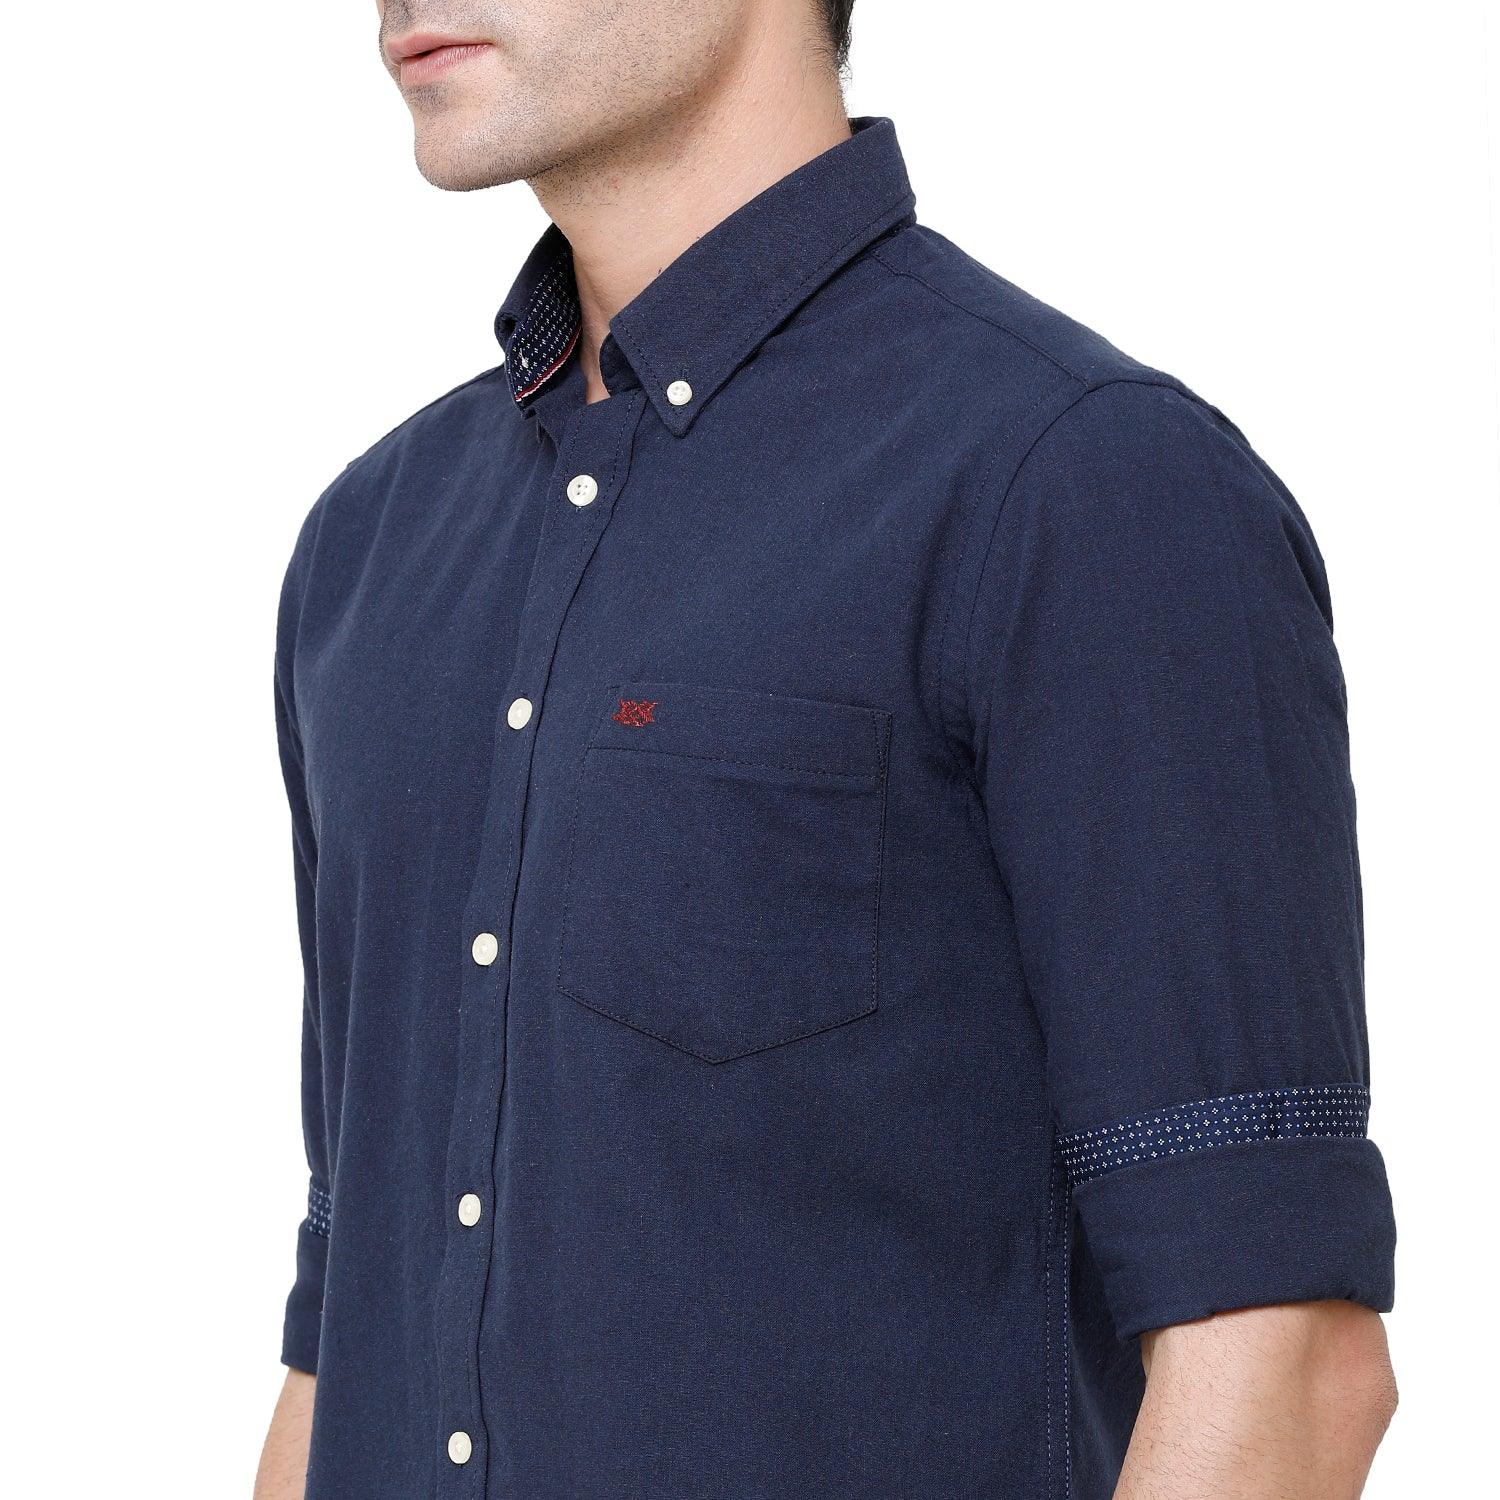 Blue Solid Casual Shirt Slim Fit - Double Two